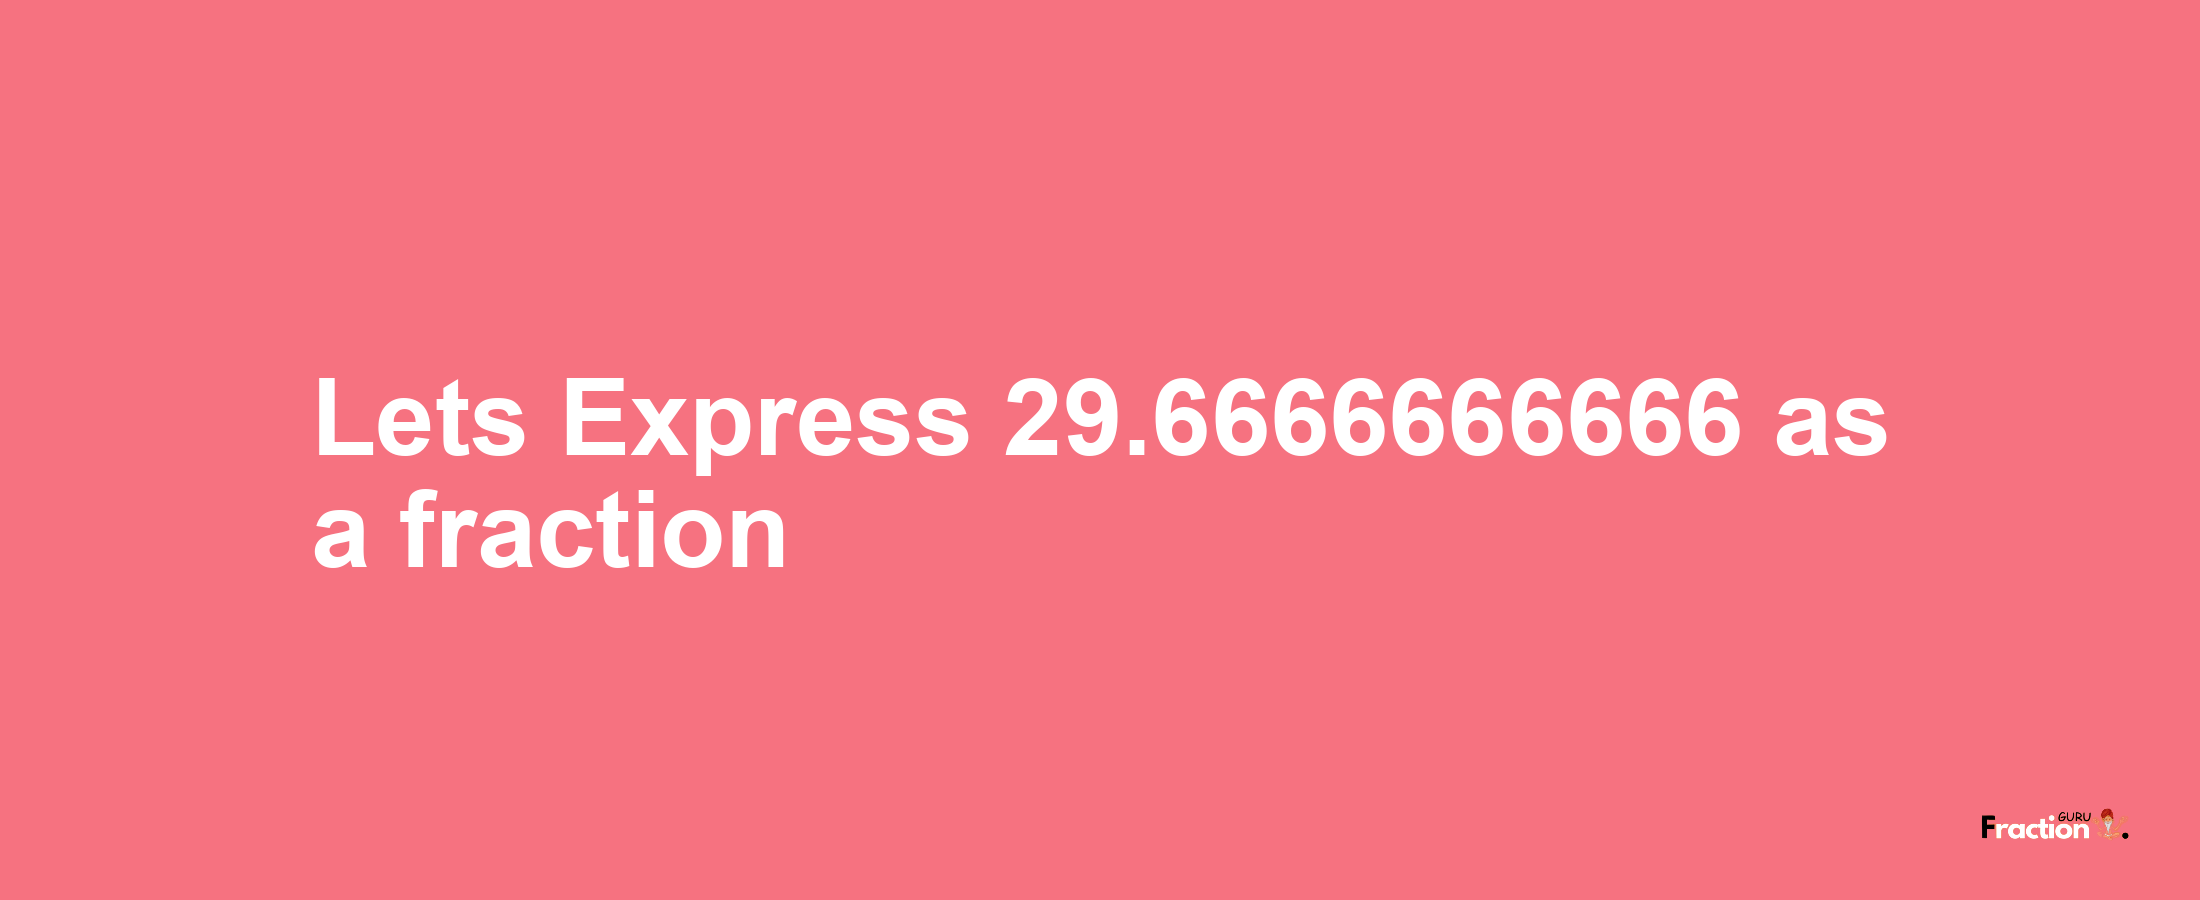 Lets Express 29.6666666666 as afraction